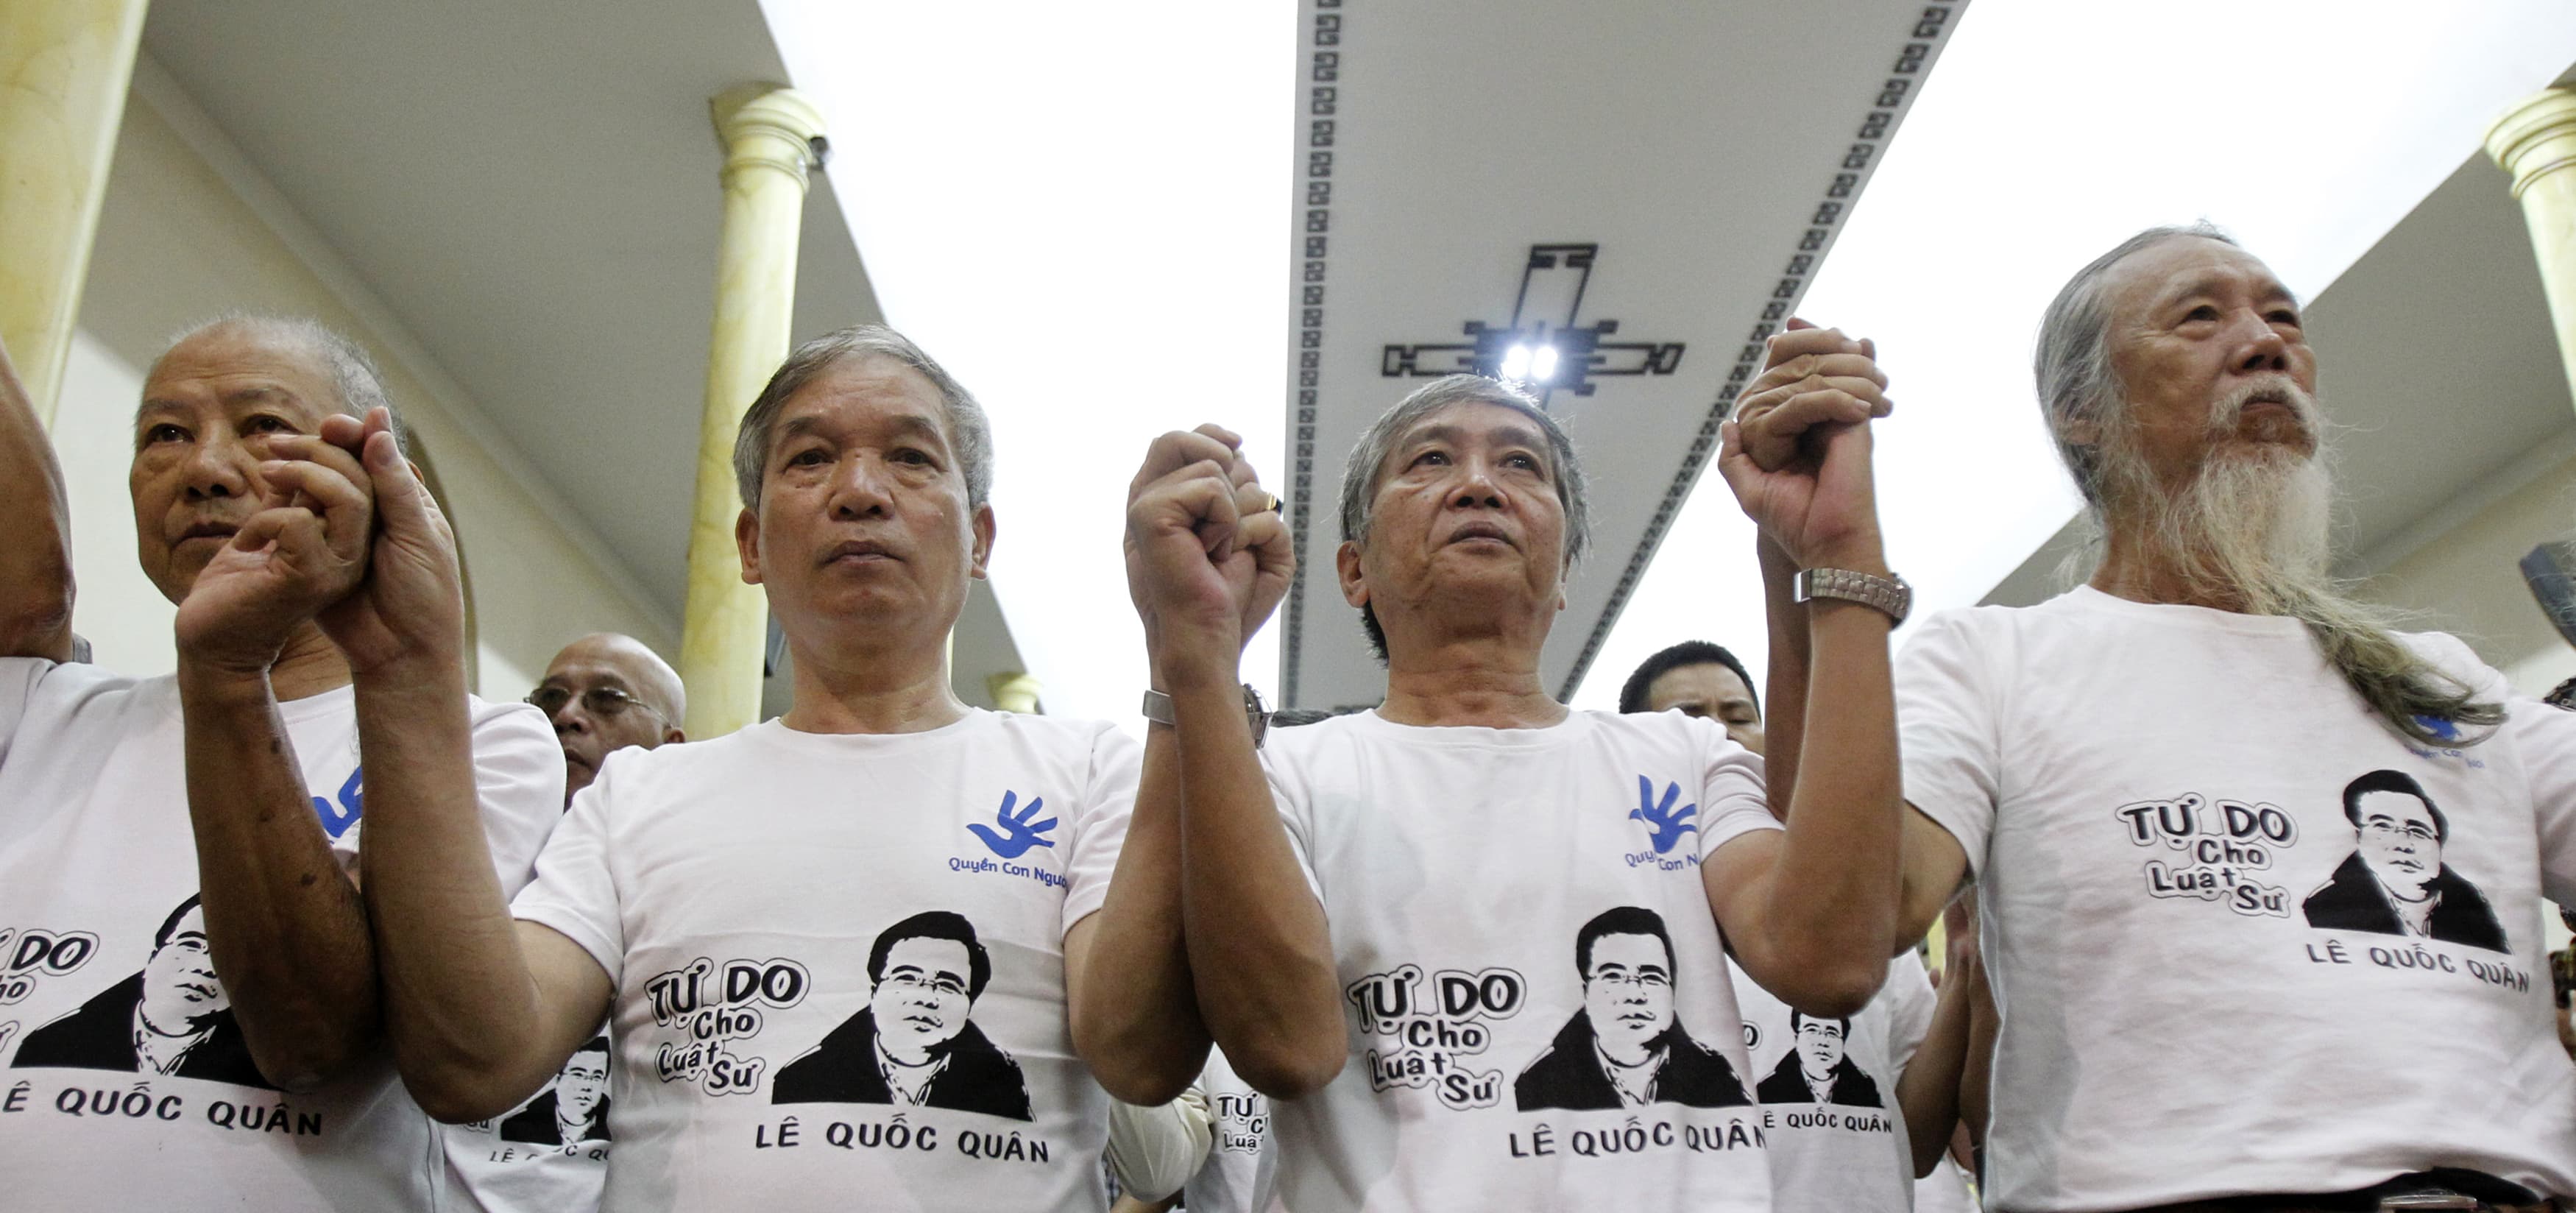 Friends and supporters wearing t-shirts with the image of lawyer Le Quoc Quan attend a mass calling for Quan to be freed at a church in Hanoi, 29 September 2013, REUTERS/Kham